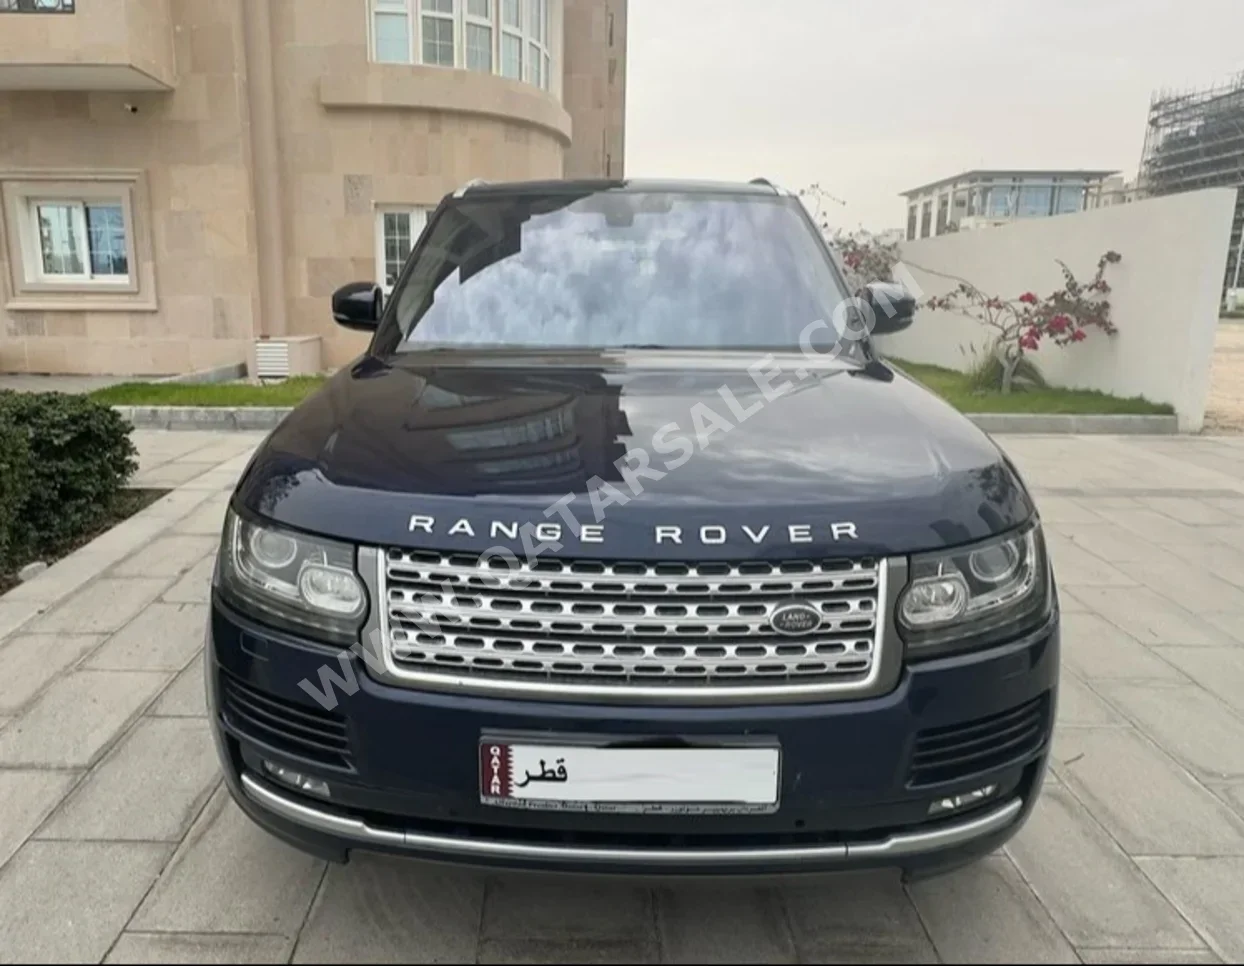 Land Rover  Range Rover  Vogue  2016  Automatic  177,500 Km  8 Cylinder  All Wheel Drive (AWD)  SUV  Dark Blue